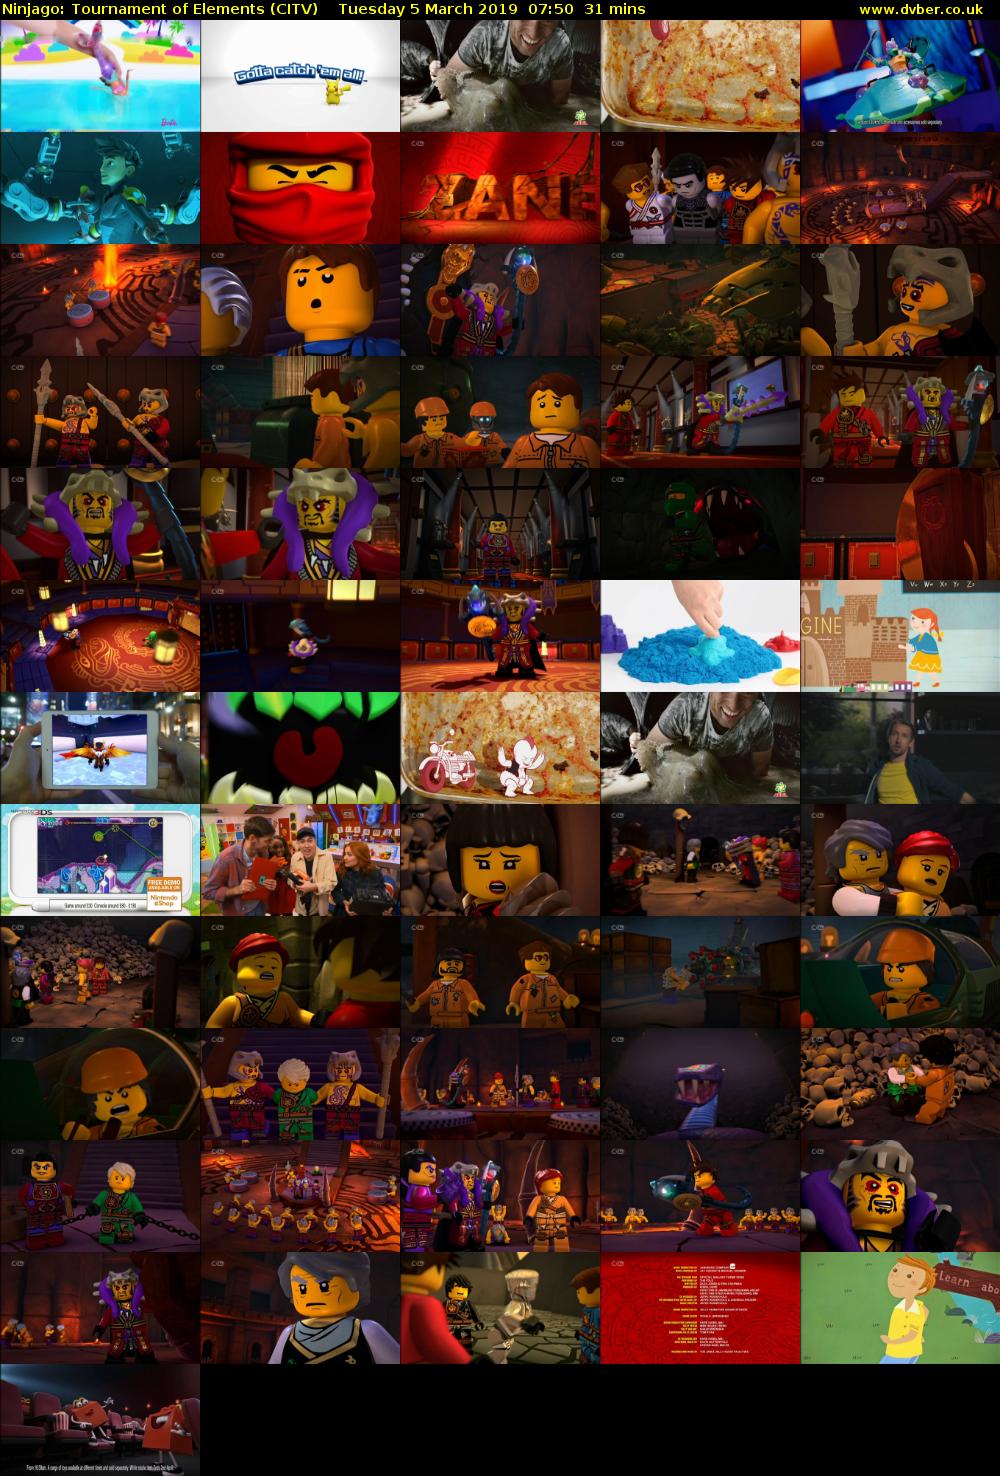 Ninjago: Tournament of Elements (CITV) Tuesday 5 March 2019 07:50 - 08:21